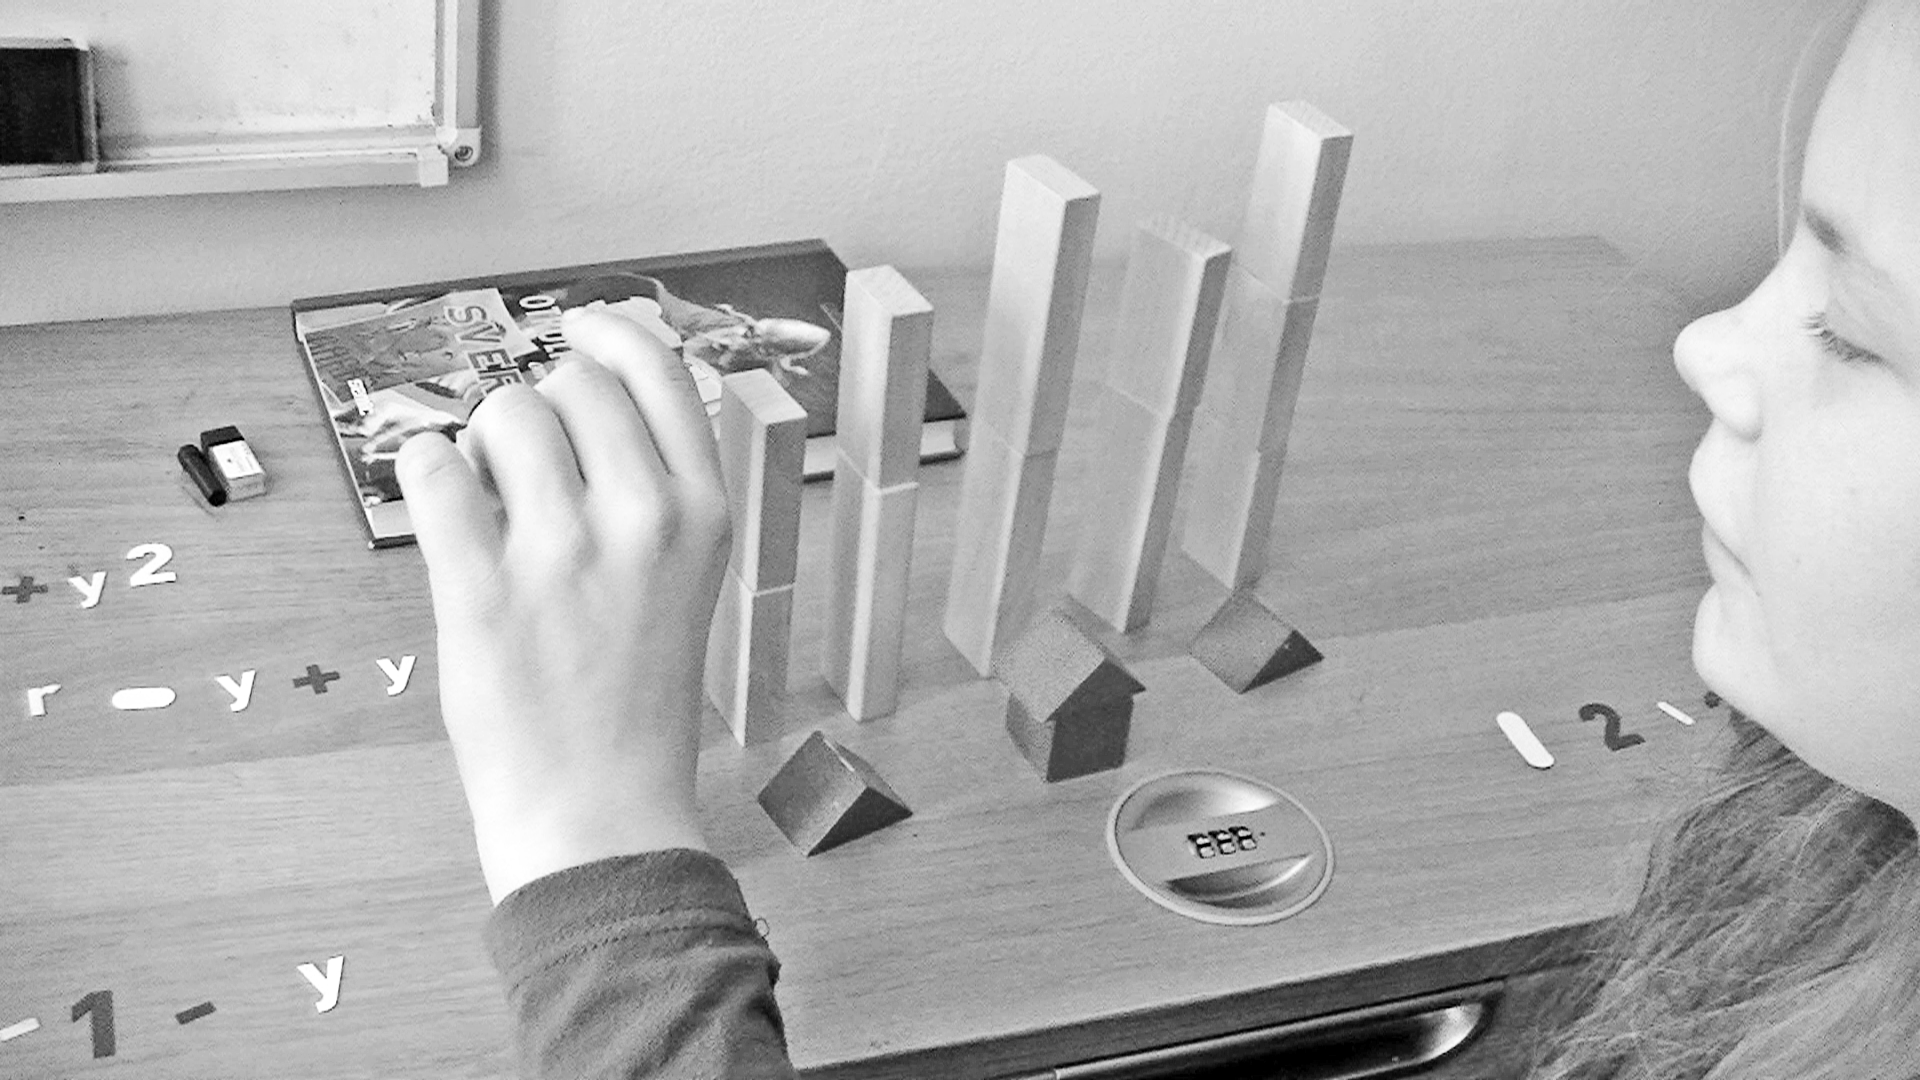 Representing sound with blocks, numbers and operations